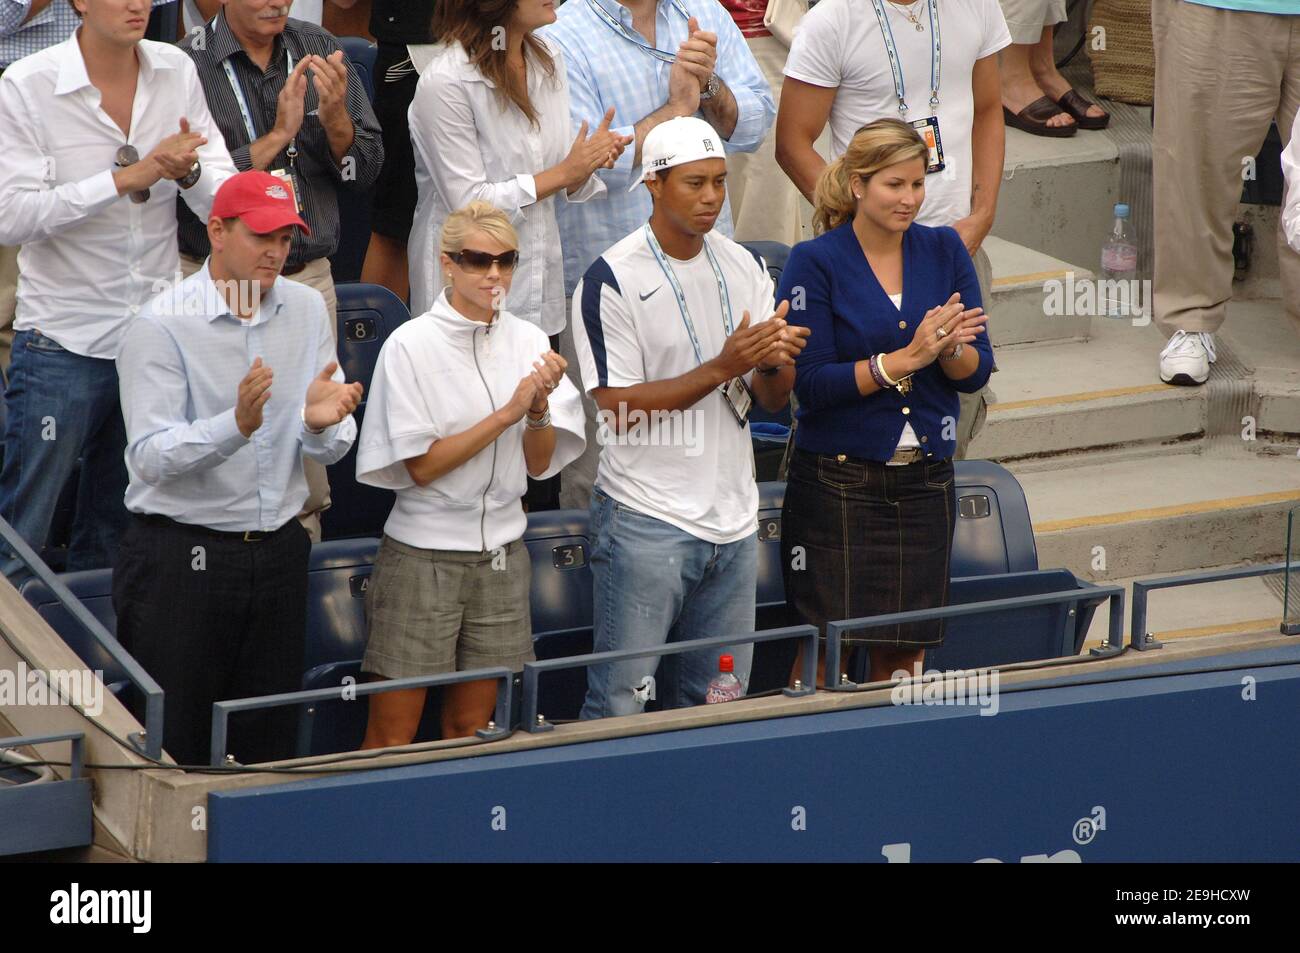 Tiger Woods and his wife Elin Nordegren with Roger Federer 's girlfriend Mirka Vavrinec watch Switzerland's Roger Federer defeating USA's Andy Roddick, 6-2, 4-6, 7-5, 6-1, in the Men's final of the 2006 US Open at the USTA Billie Jean King National Tennis Center in Flushing Meadows, in New York City, NY, USA, on September 10, 2006. Photo by Lionel Hahn/Cameleon/ABACAPRESS.COM Stock Photo